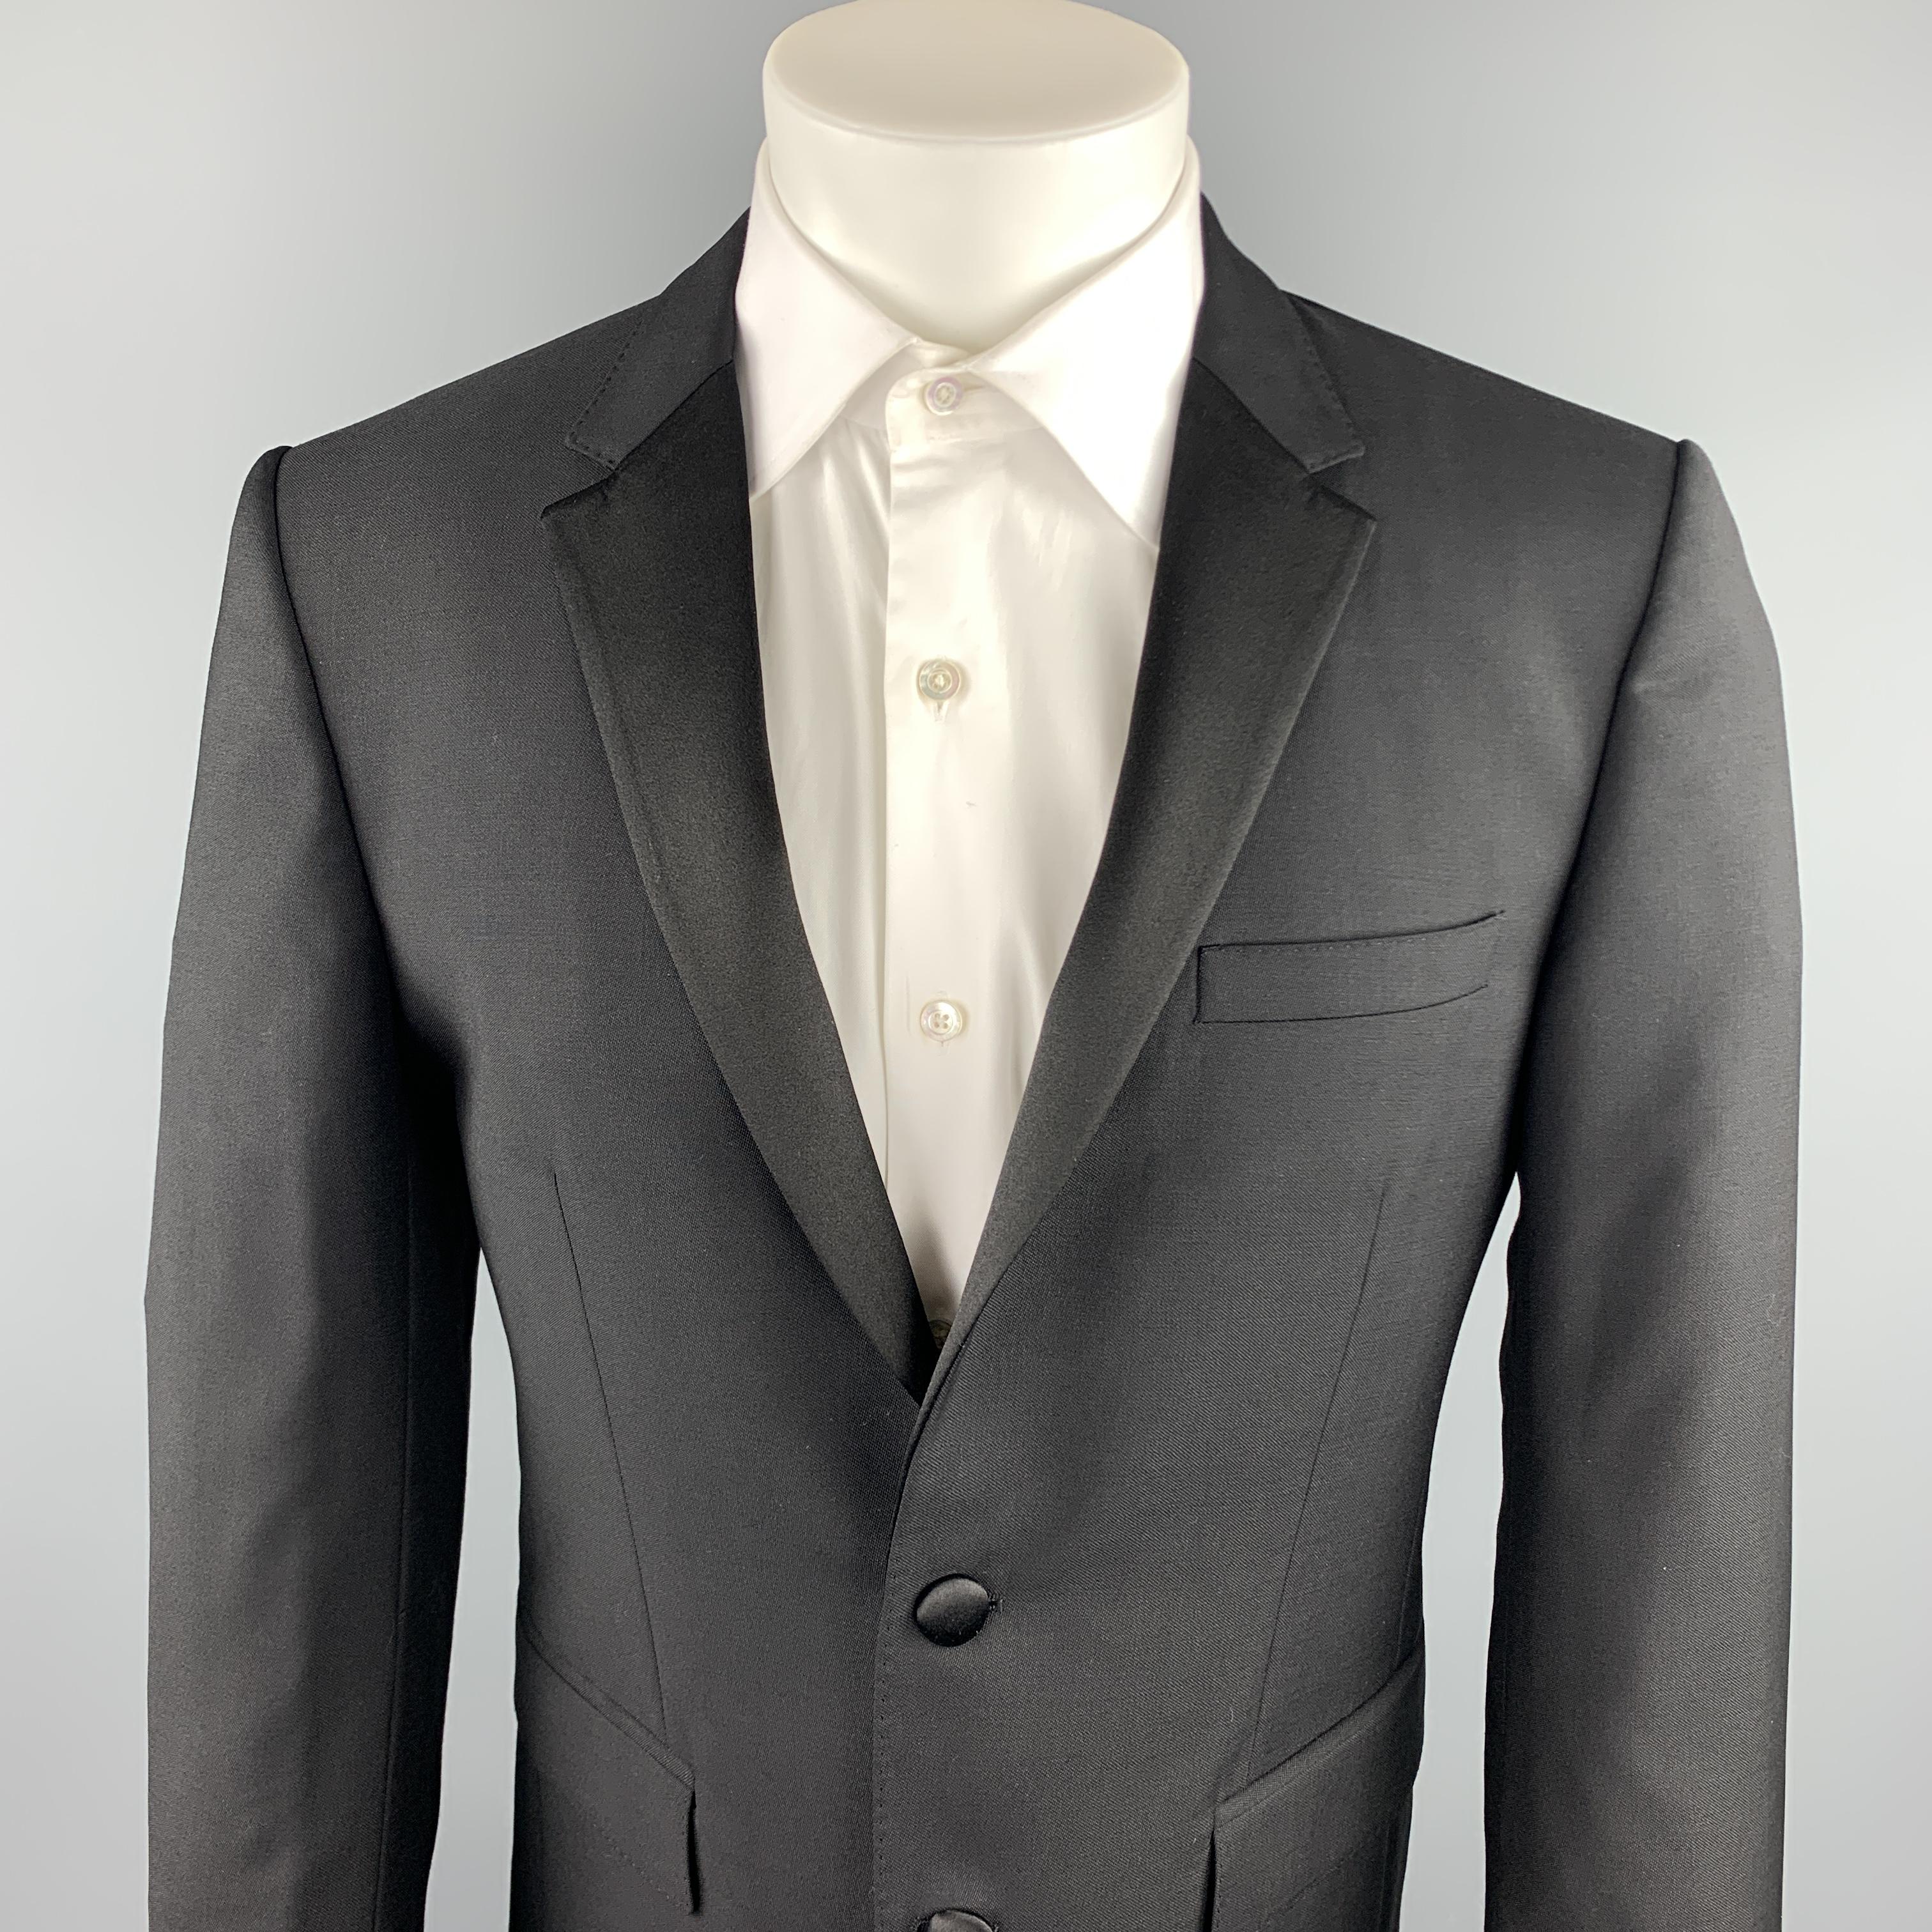 BURBERRY LONDON tuxedo sport coat comes in a black wool / mohair featuring a notch lapel style, flap pockets, and a two button closure. Made in Italy.

Excellent Pre-Owned Condition.
Marked: IT 48

Measurements:

Shoulder: 17.5 in. 
Chest: 38 in.